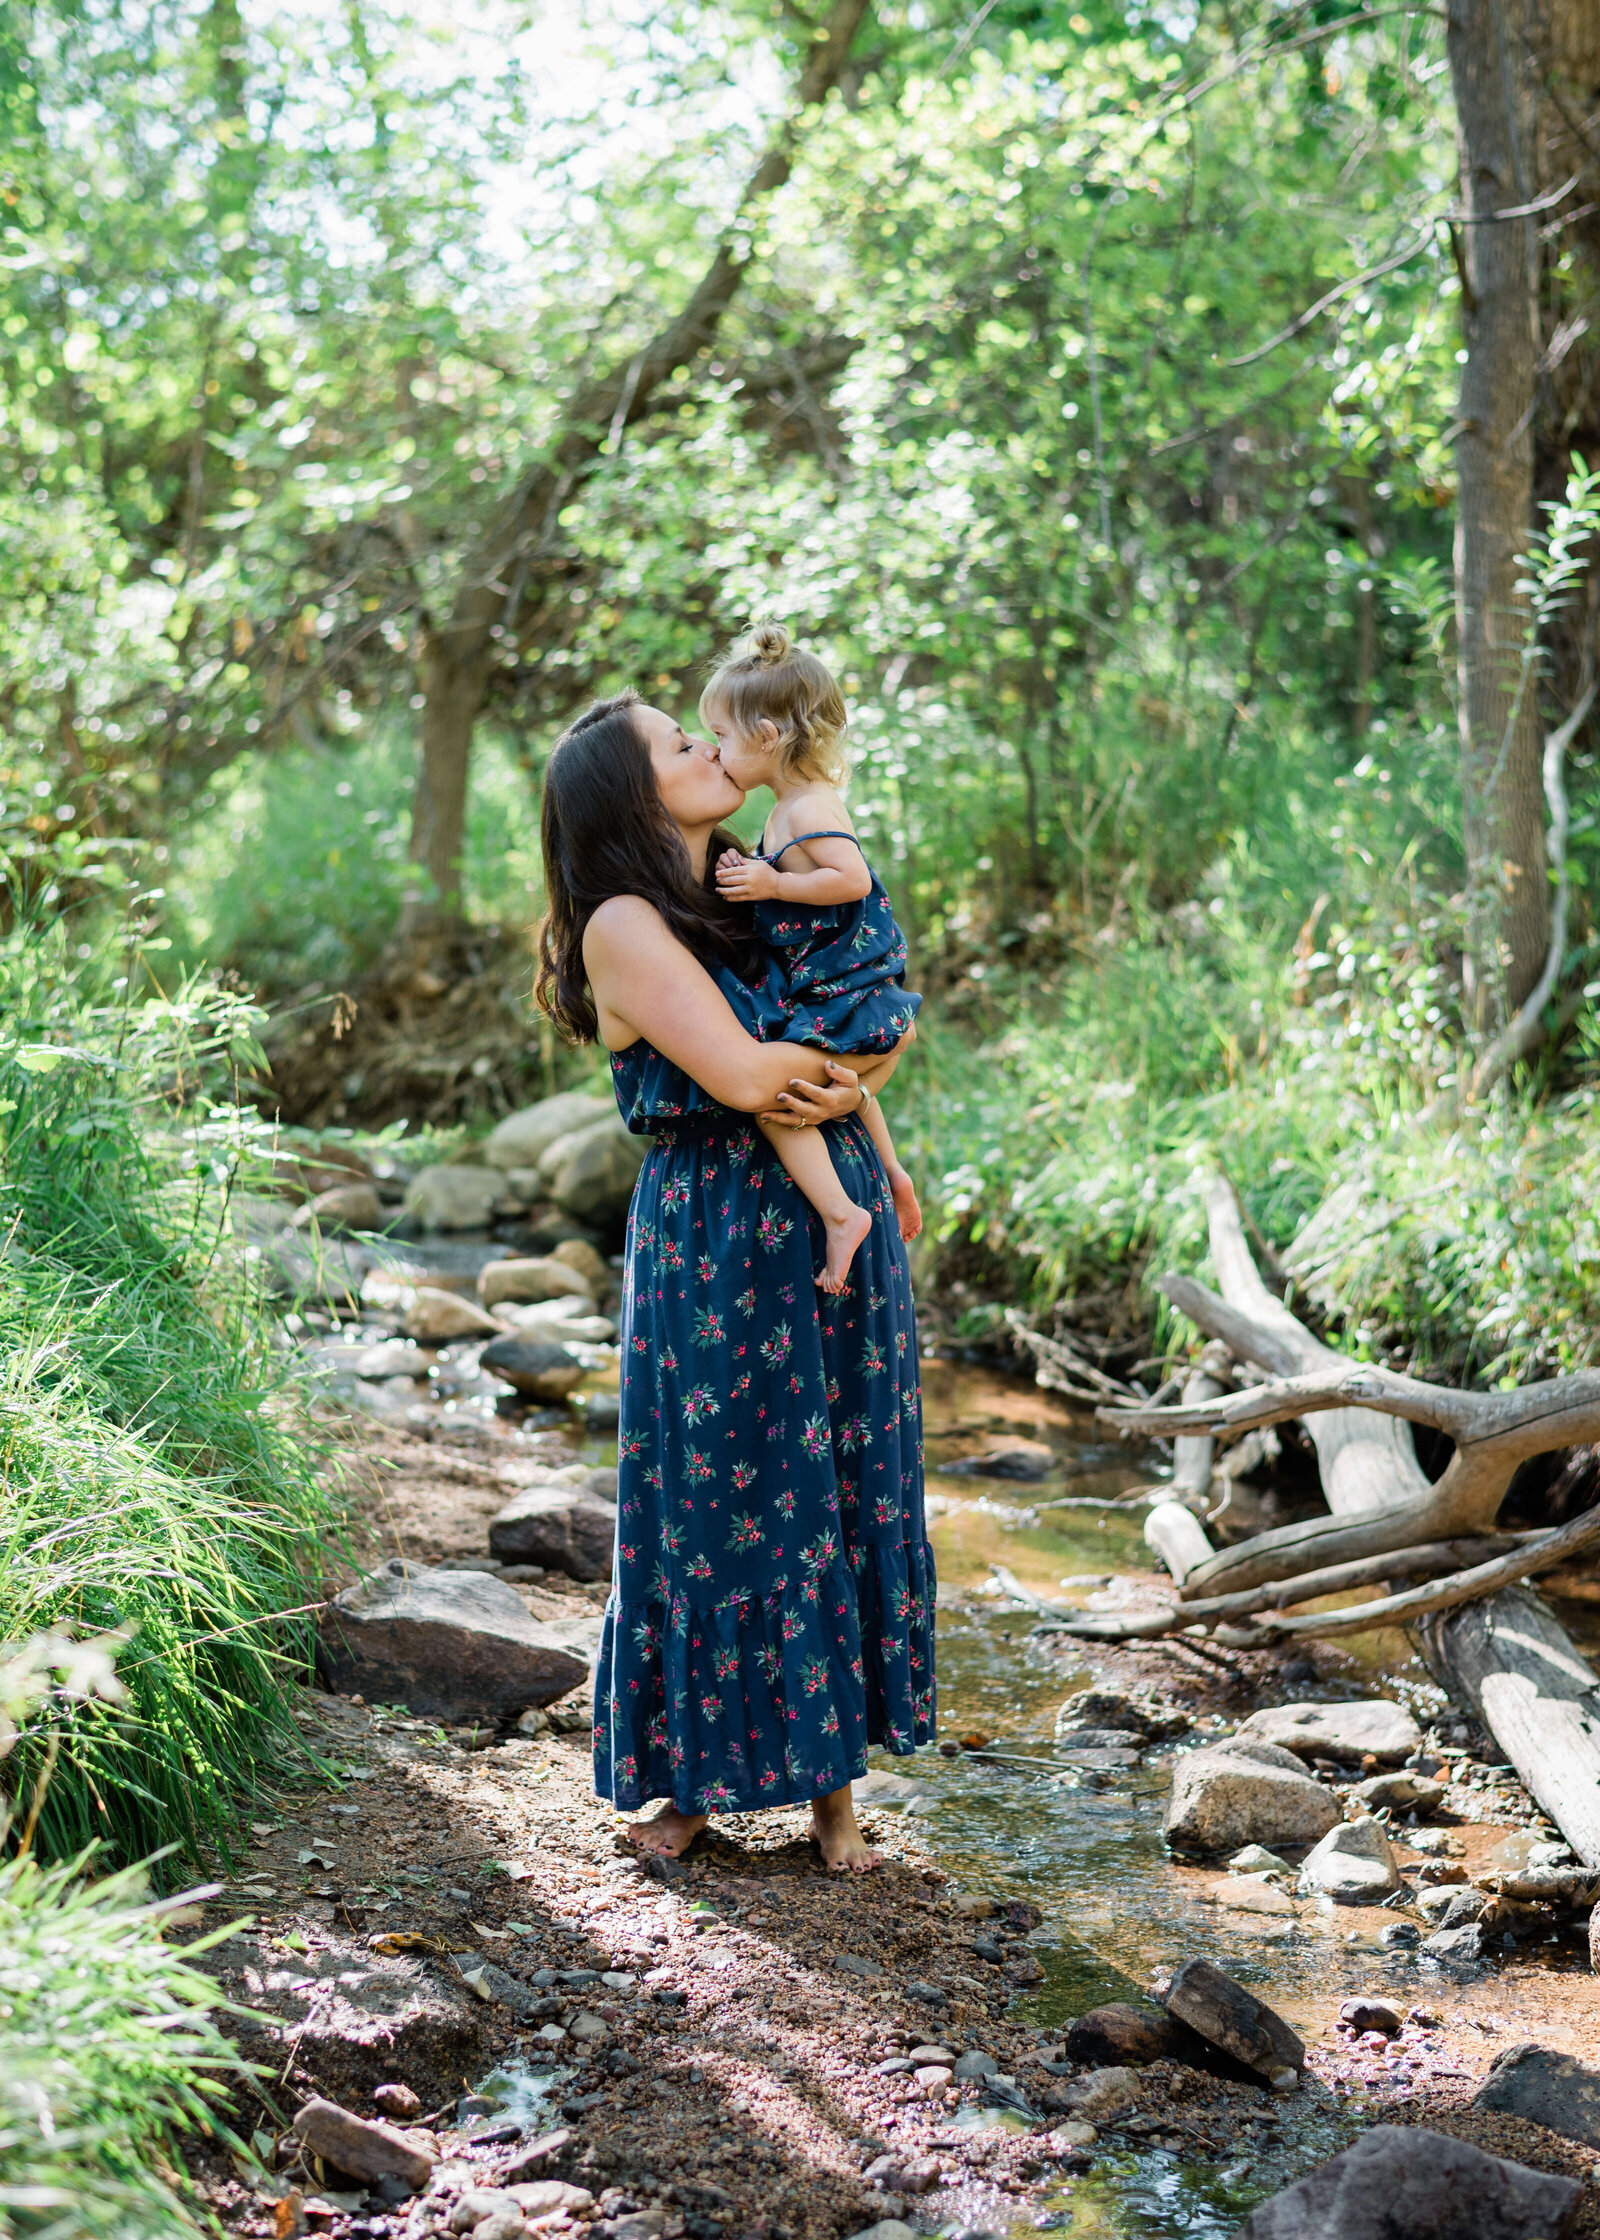 Barefoot and carefree, a mother holds her toddler and kisses her while standing in a stream